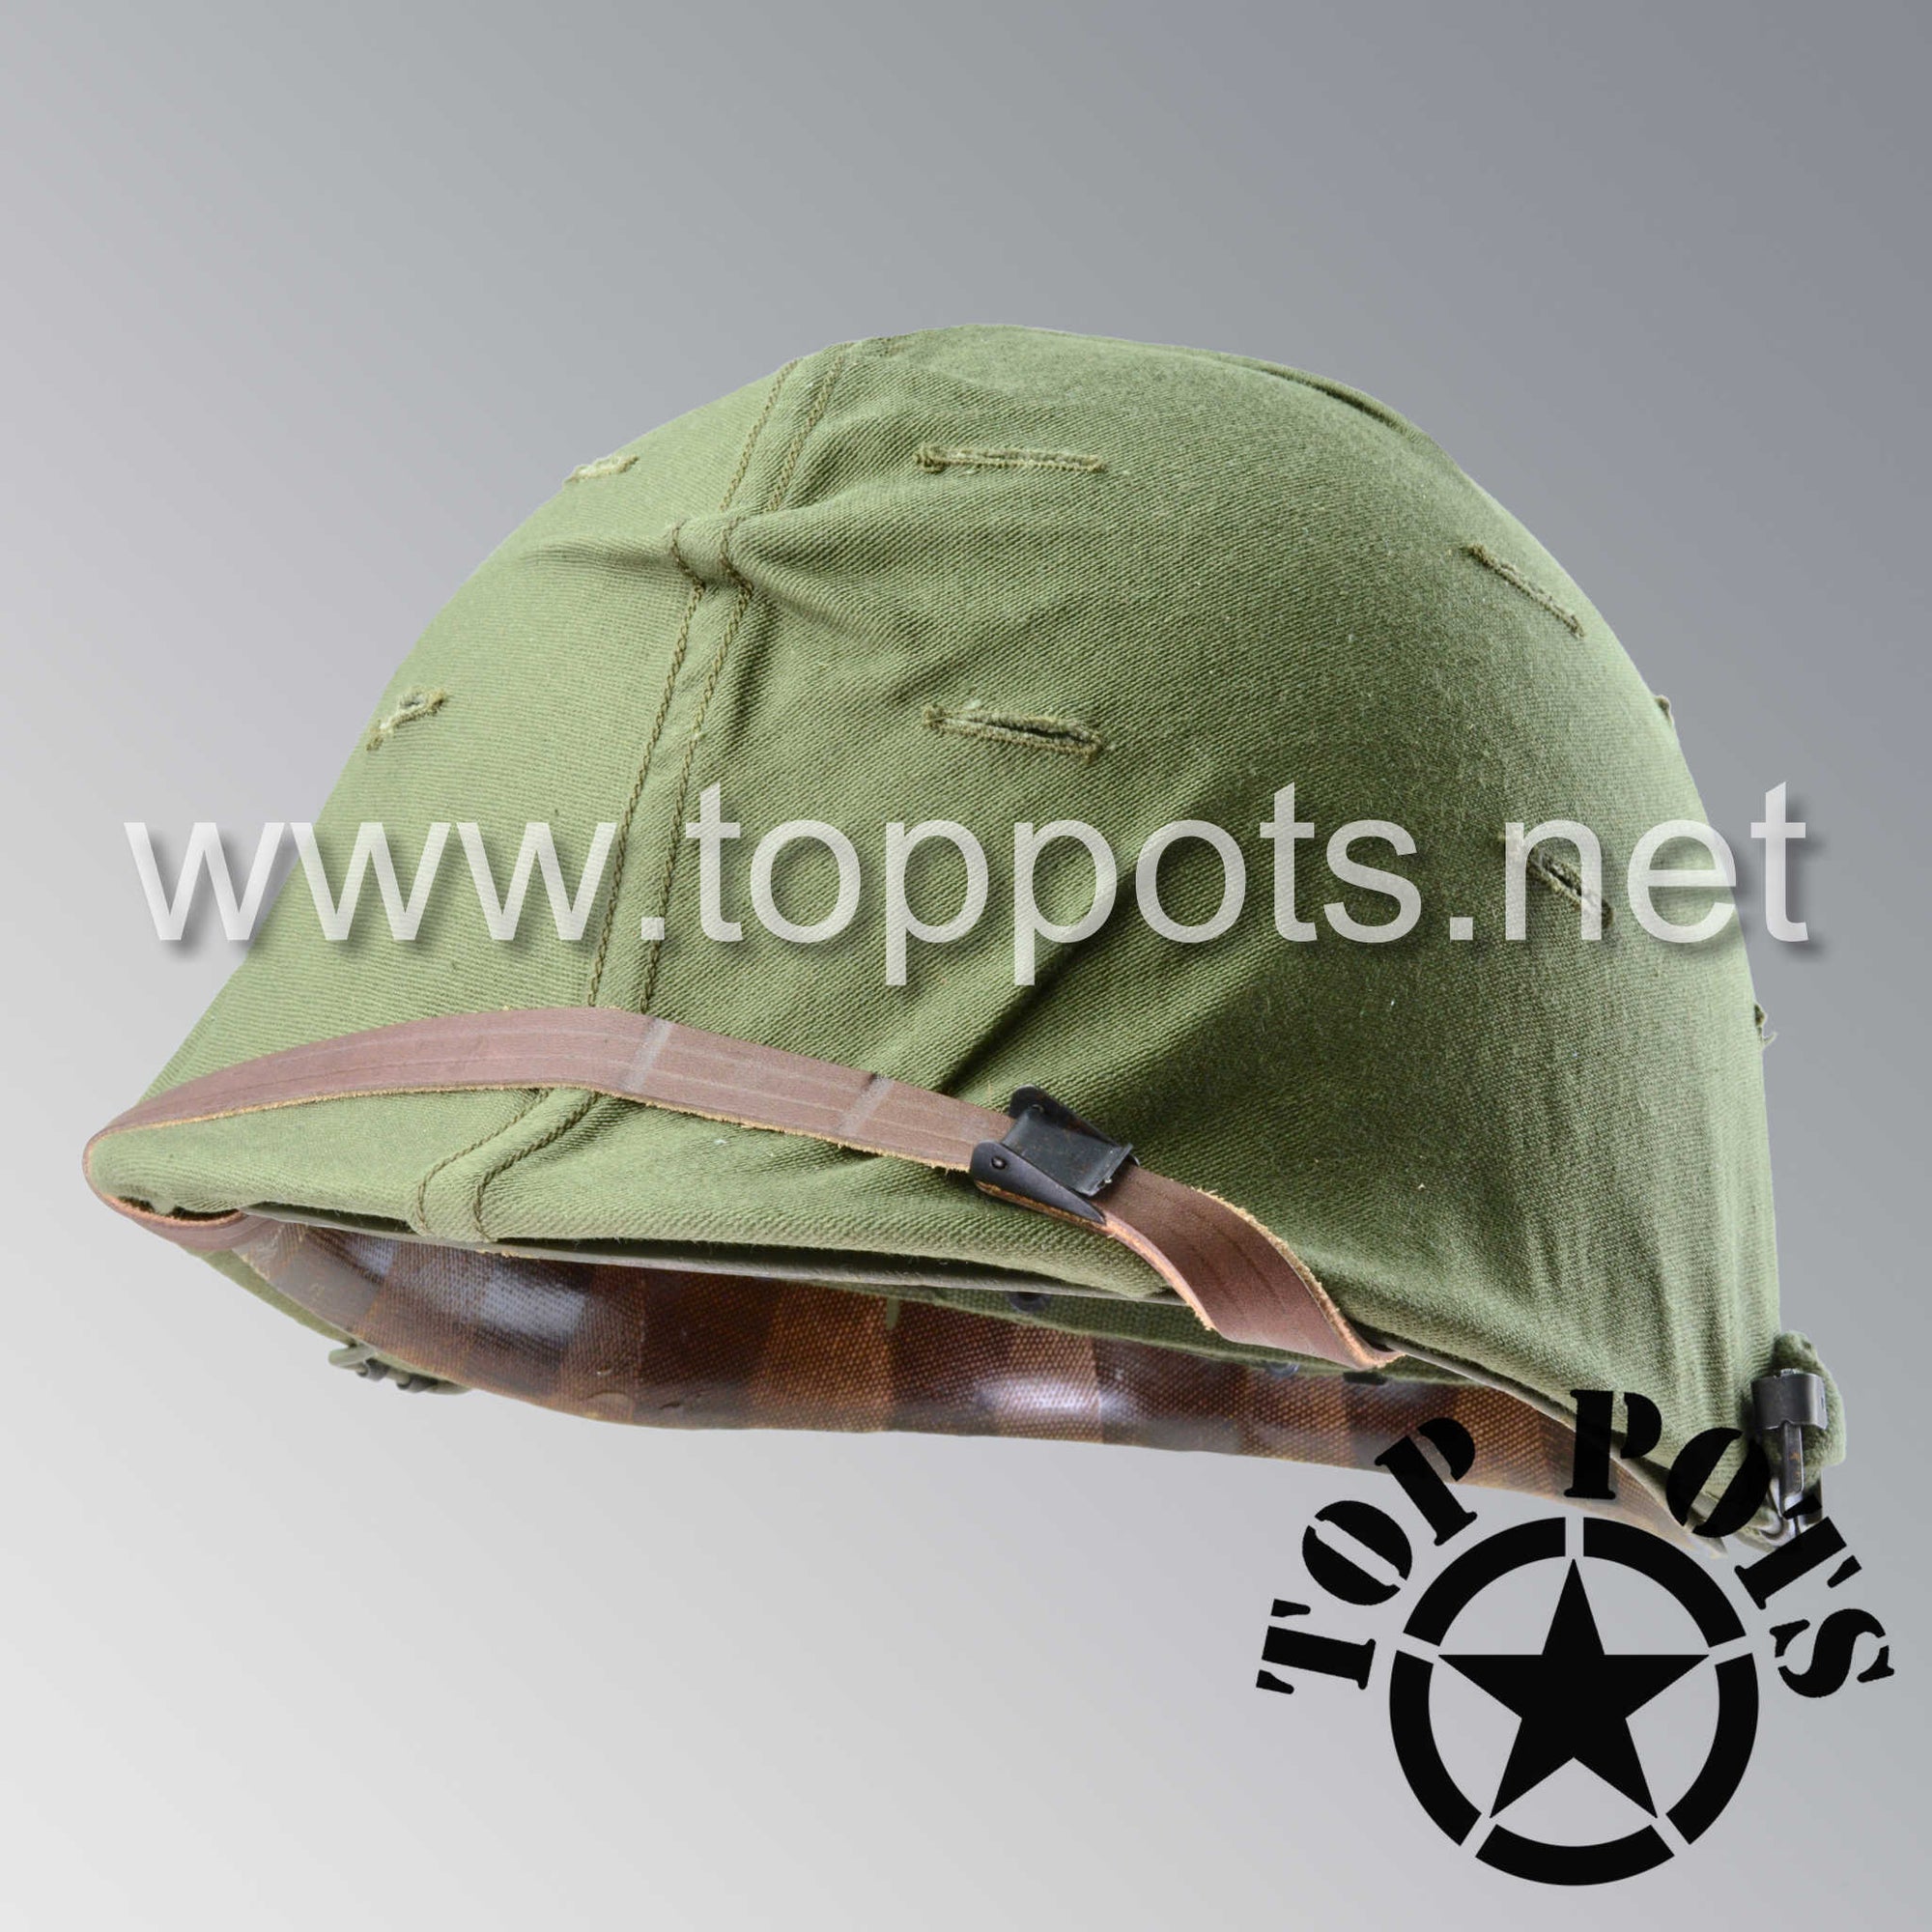 Vietnam War US Army Original M1 Infantry Helmet Swivel Bale Shell and P55 Liner with Early War Olive Drab Cover